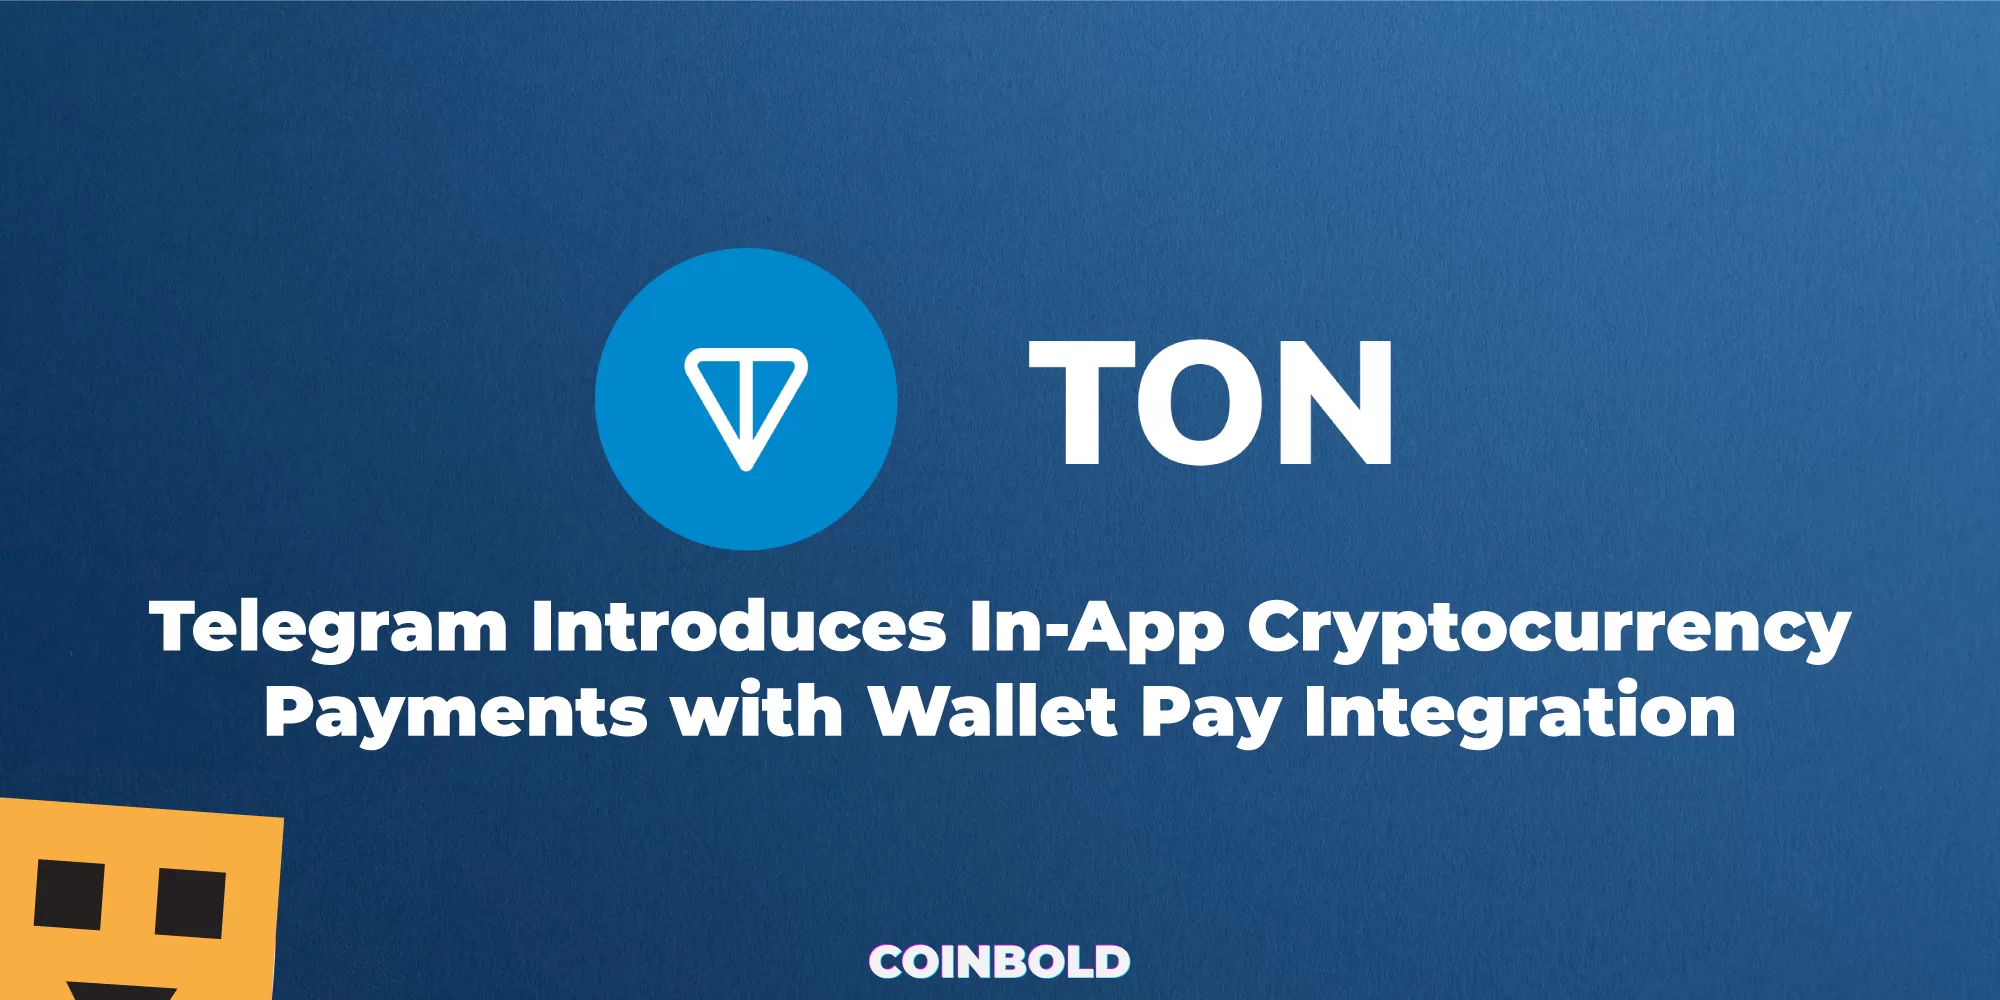 Telegram Introduces In-App Cryptocurrency Payments with Wallet Pay Integration